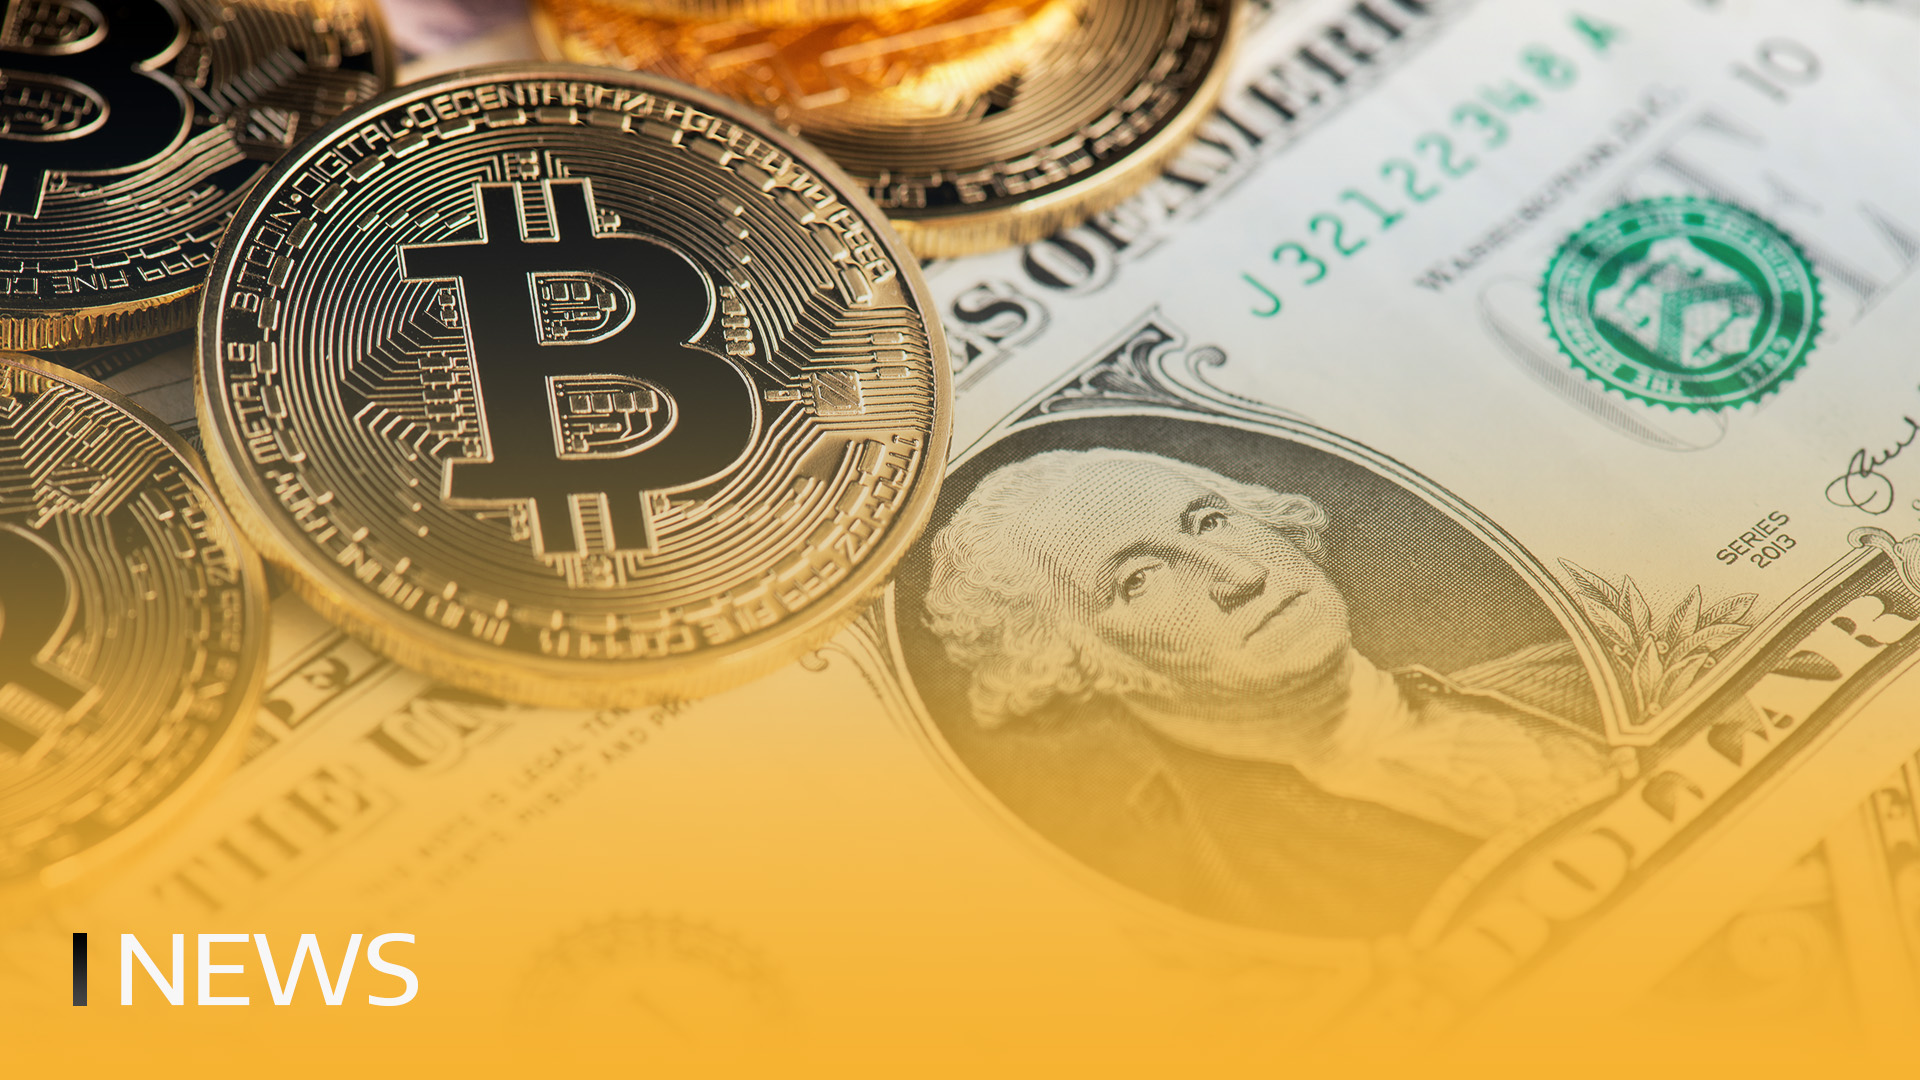 Bitcoin Investment Products Record $3 Billion Inflow